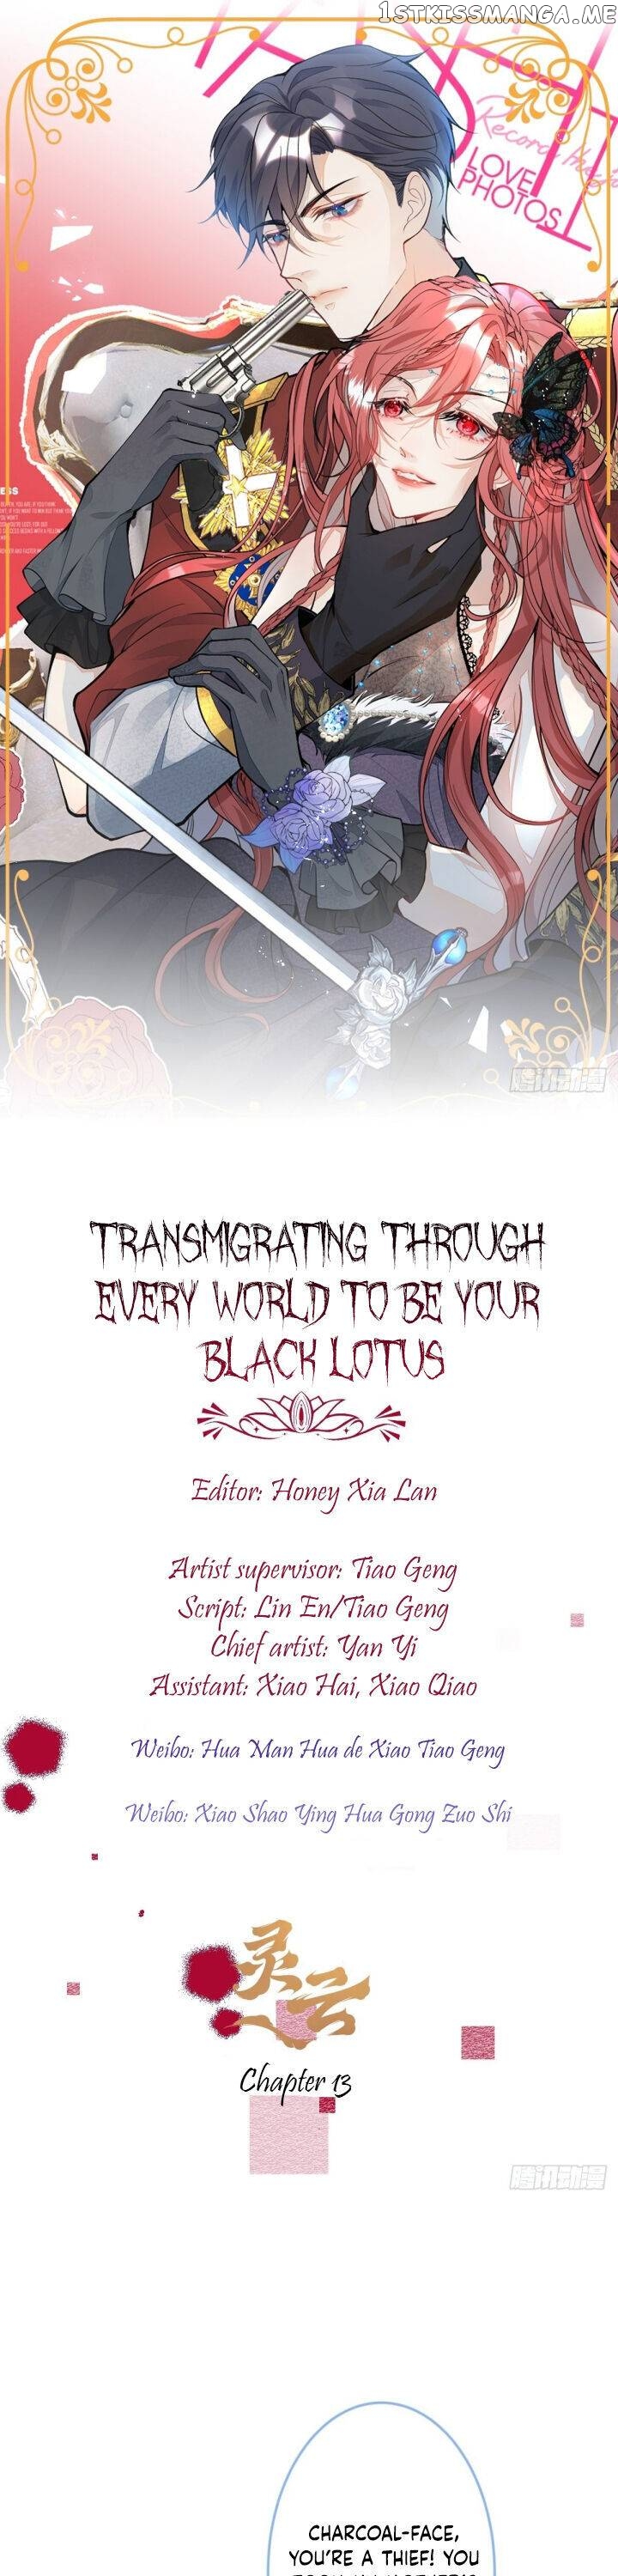 Transmigrating Through Every World To Be Your Black Lotus chapter 13